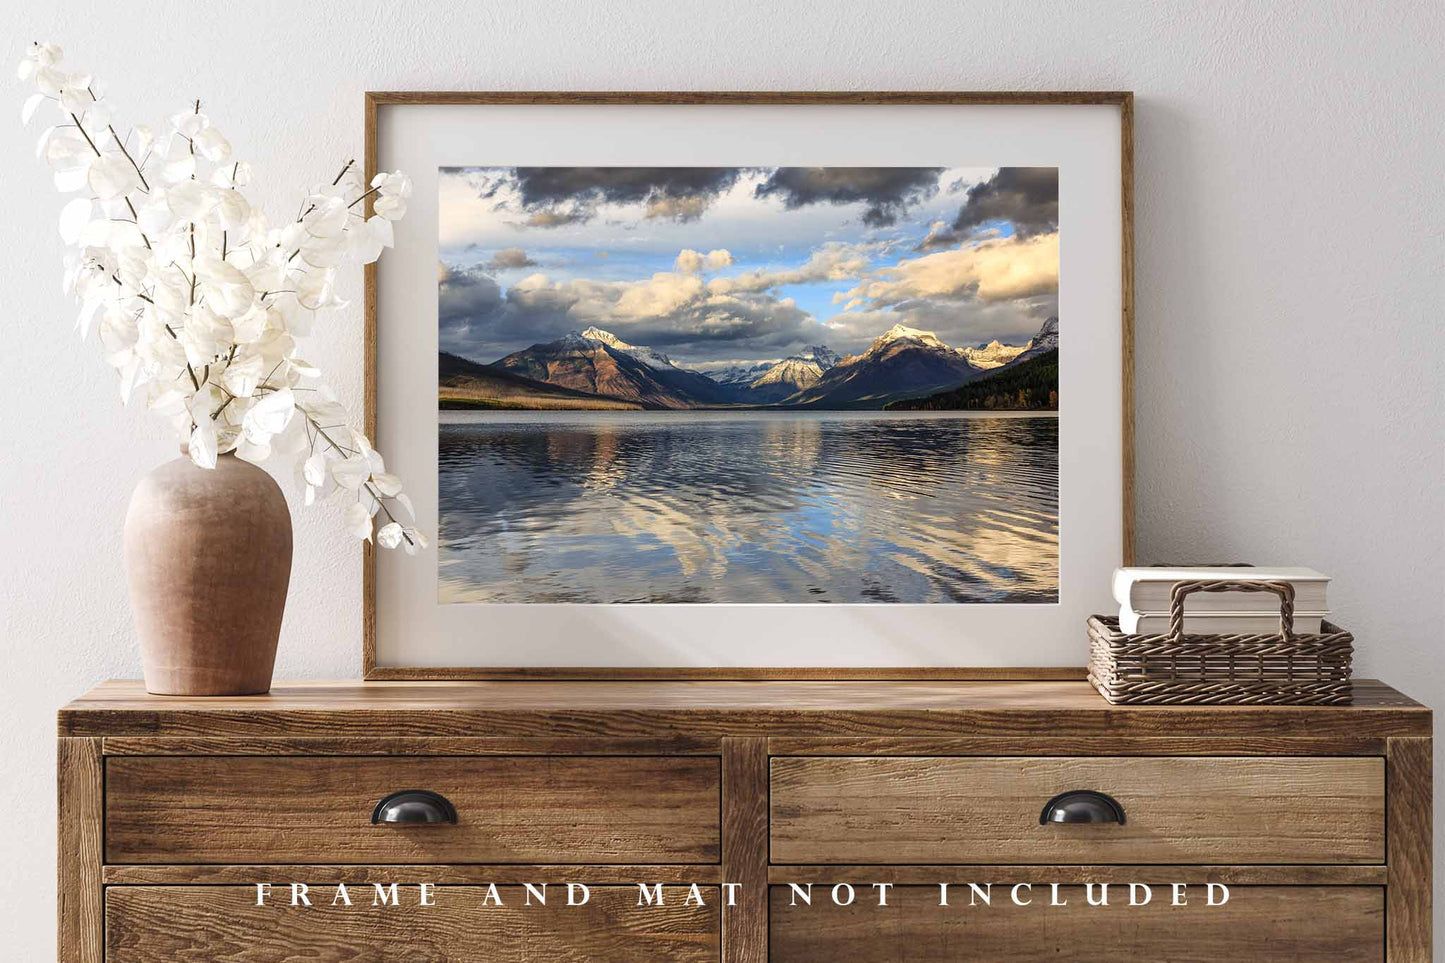 Glacier National Park Photograpy Print (Not Framed) Picture of Snowy Peaks at Lake McDonald on Autumn Day in Montana Rocky Mountain Wall Art Nature Decor